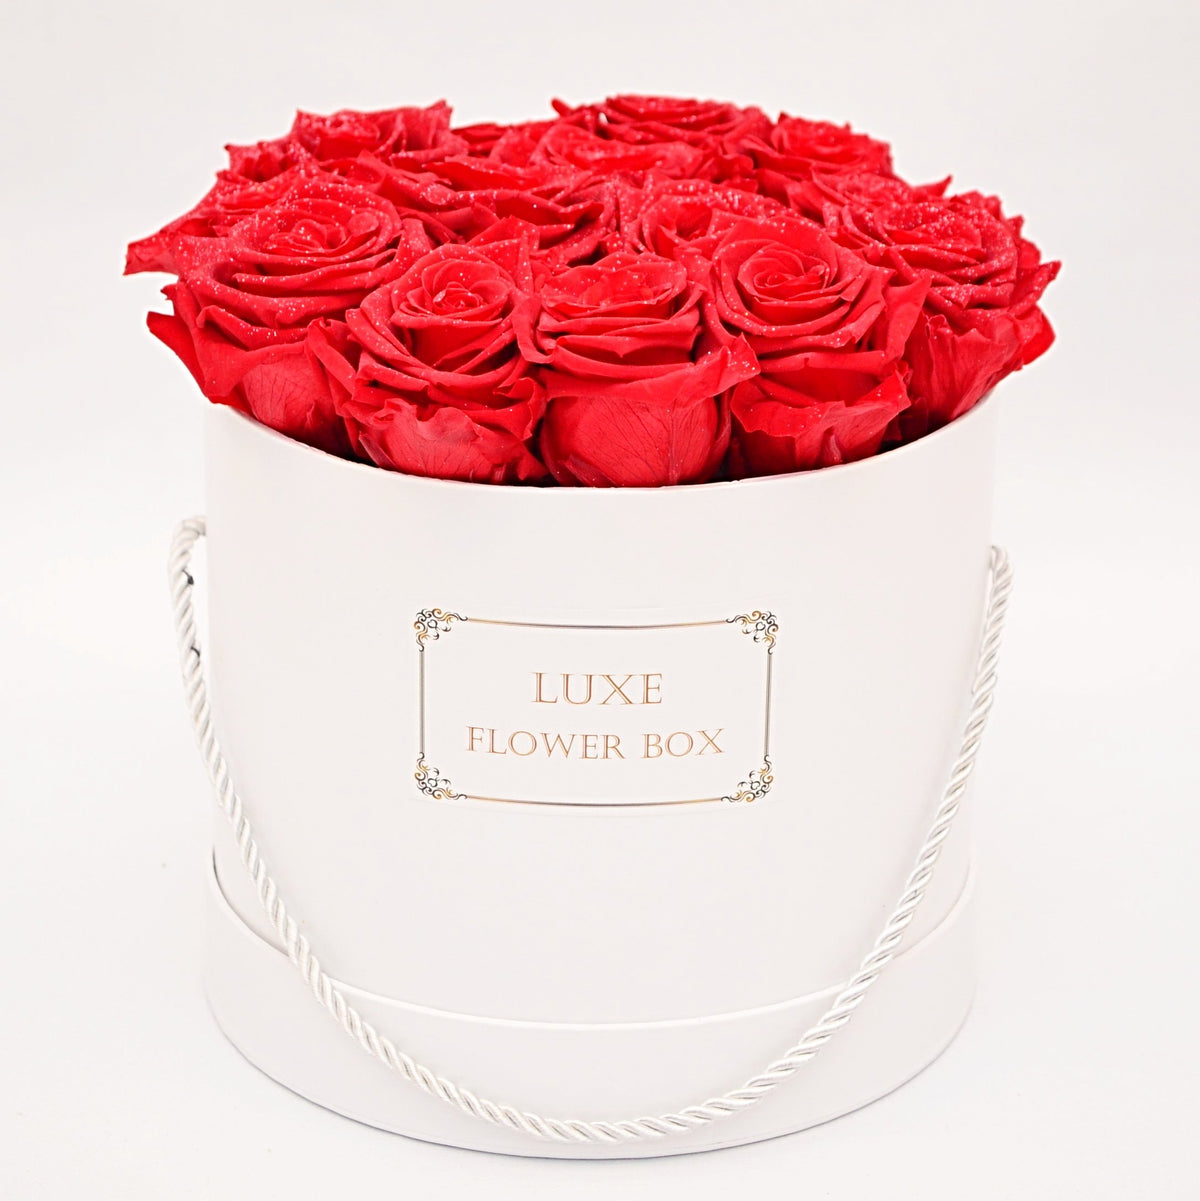 Medium Round Box of Red Roses- Last more than 1 year